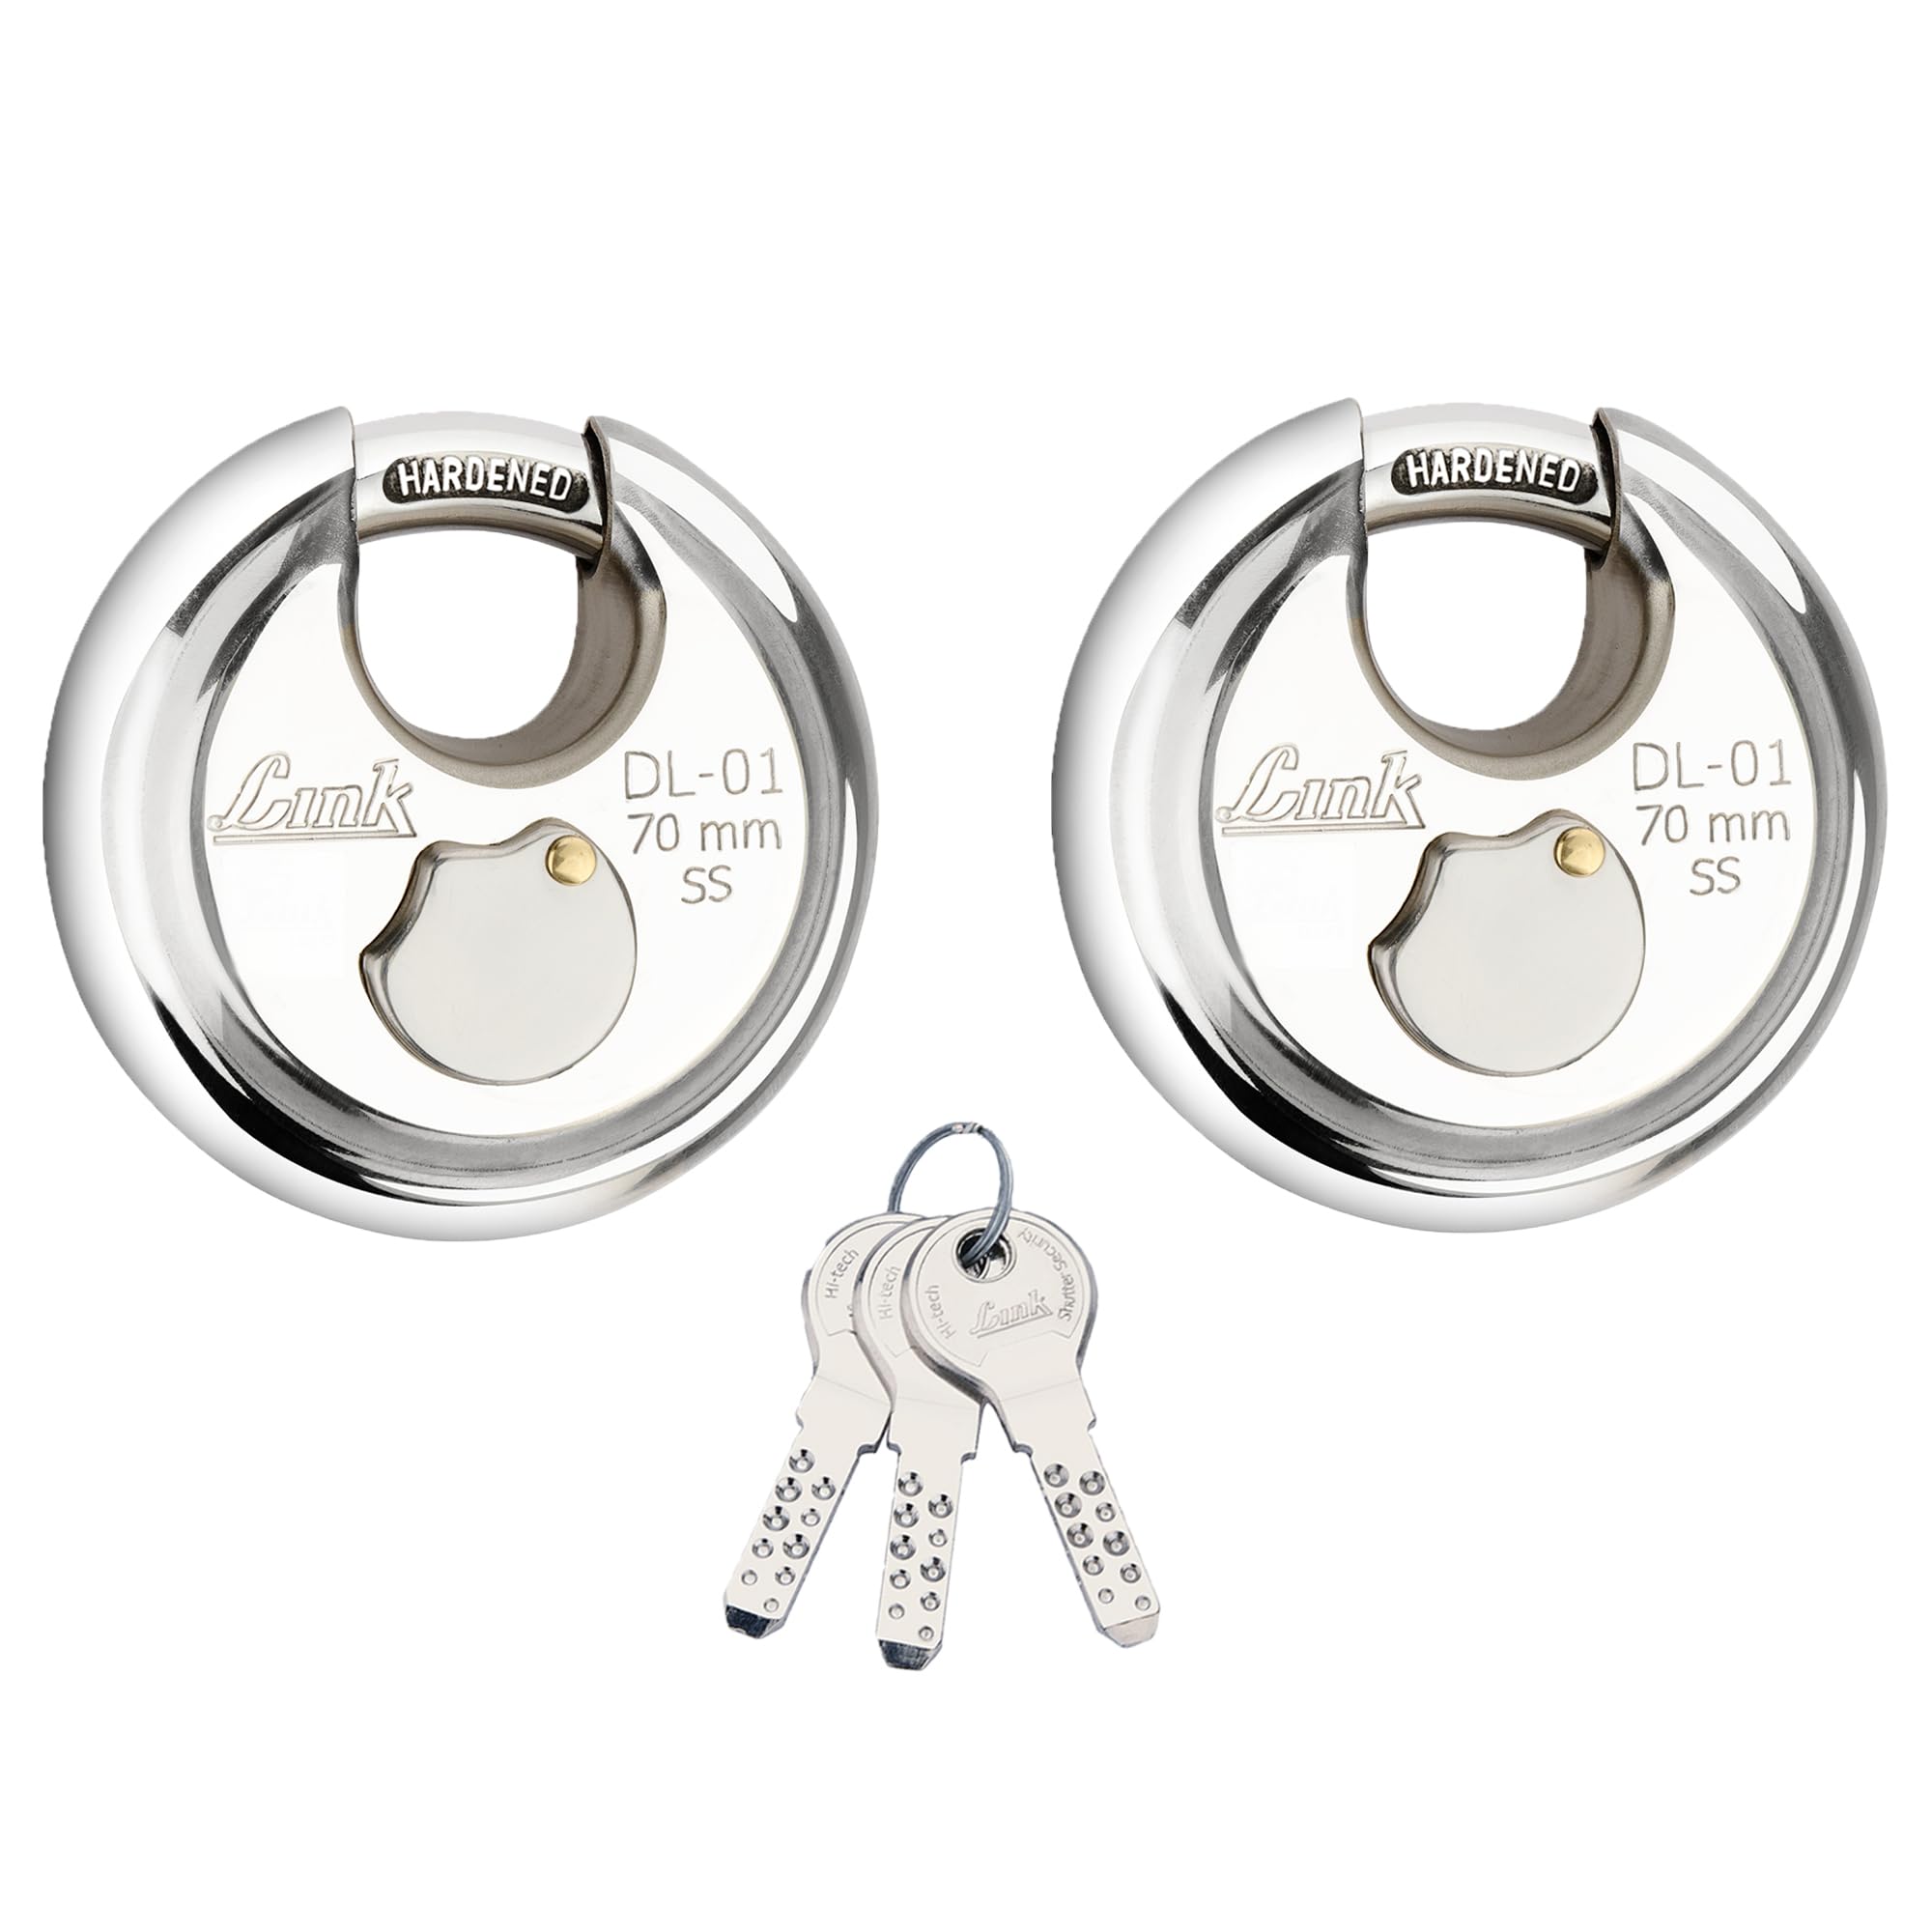 Link Disc Lock 70mm Round Padlock Hardened Shackle I with 3 Common Keys I Padlock for Main Door I Gate Lock I Lock for Shutters I Common Key Lock Set (Silver,Pack of 2)